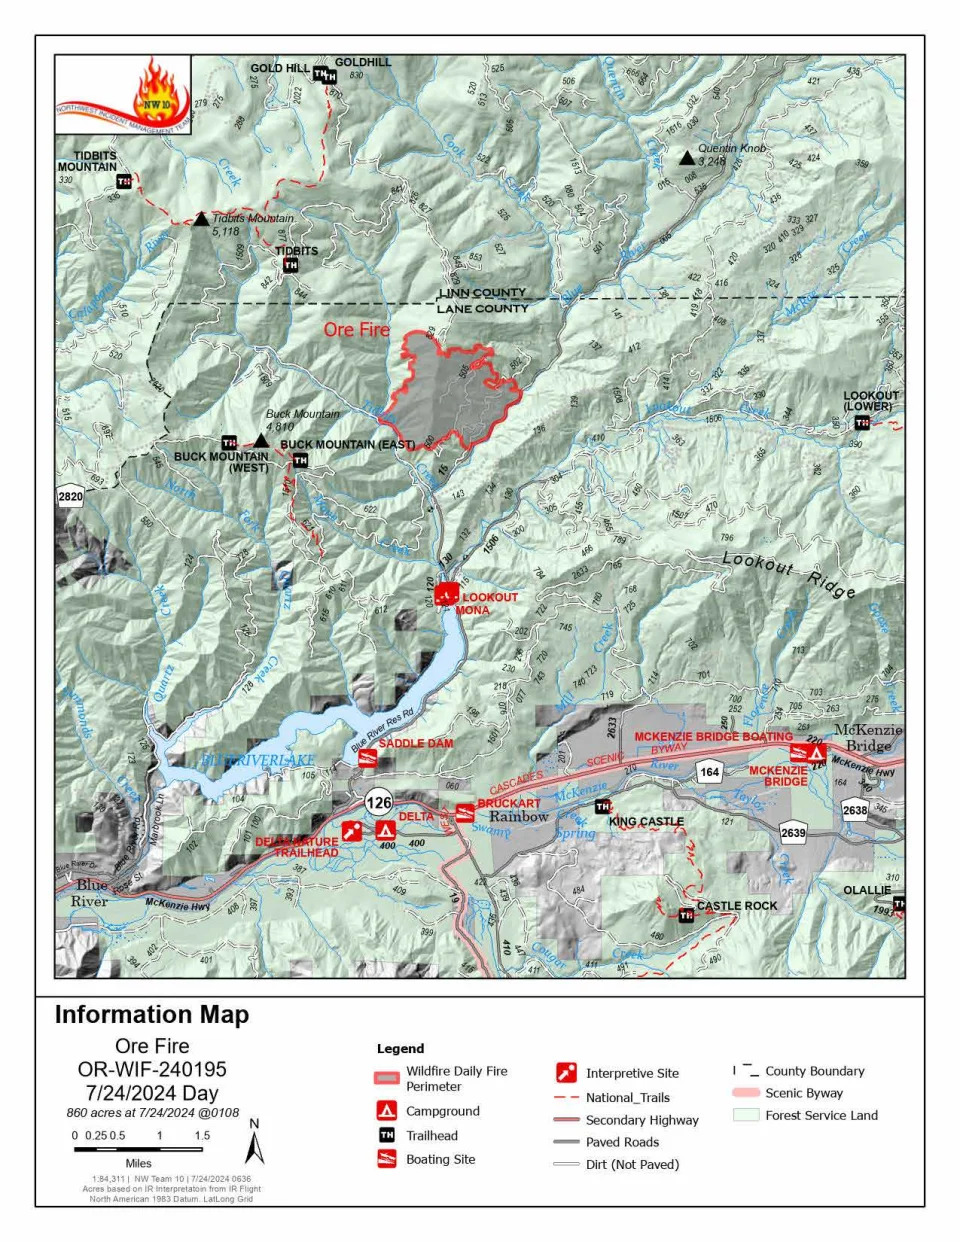 Ore Fire information map.